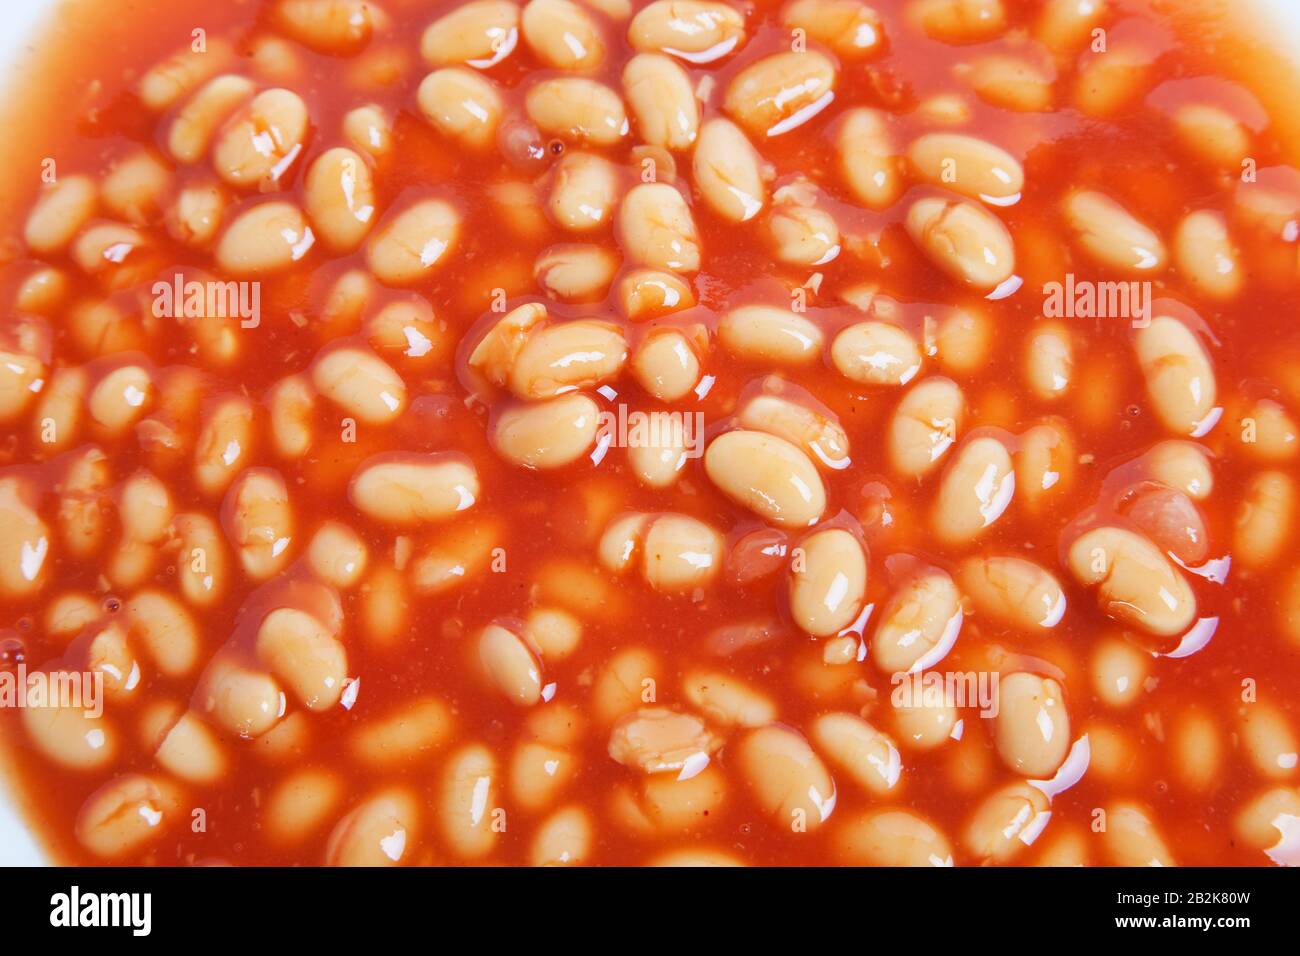 Close-up view of baked beans Stock Photo